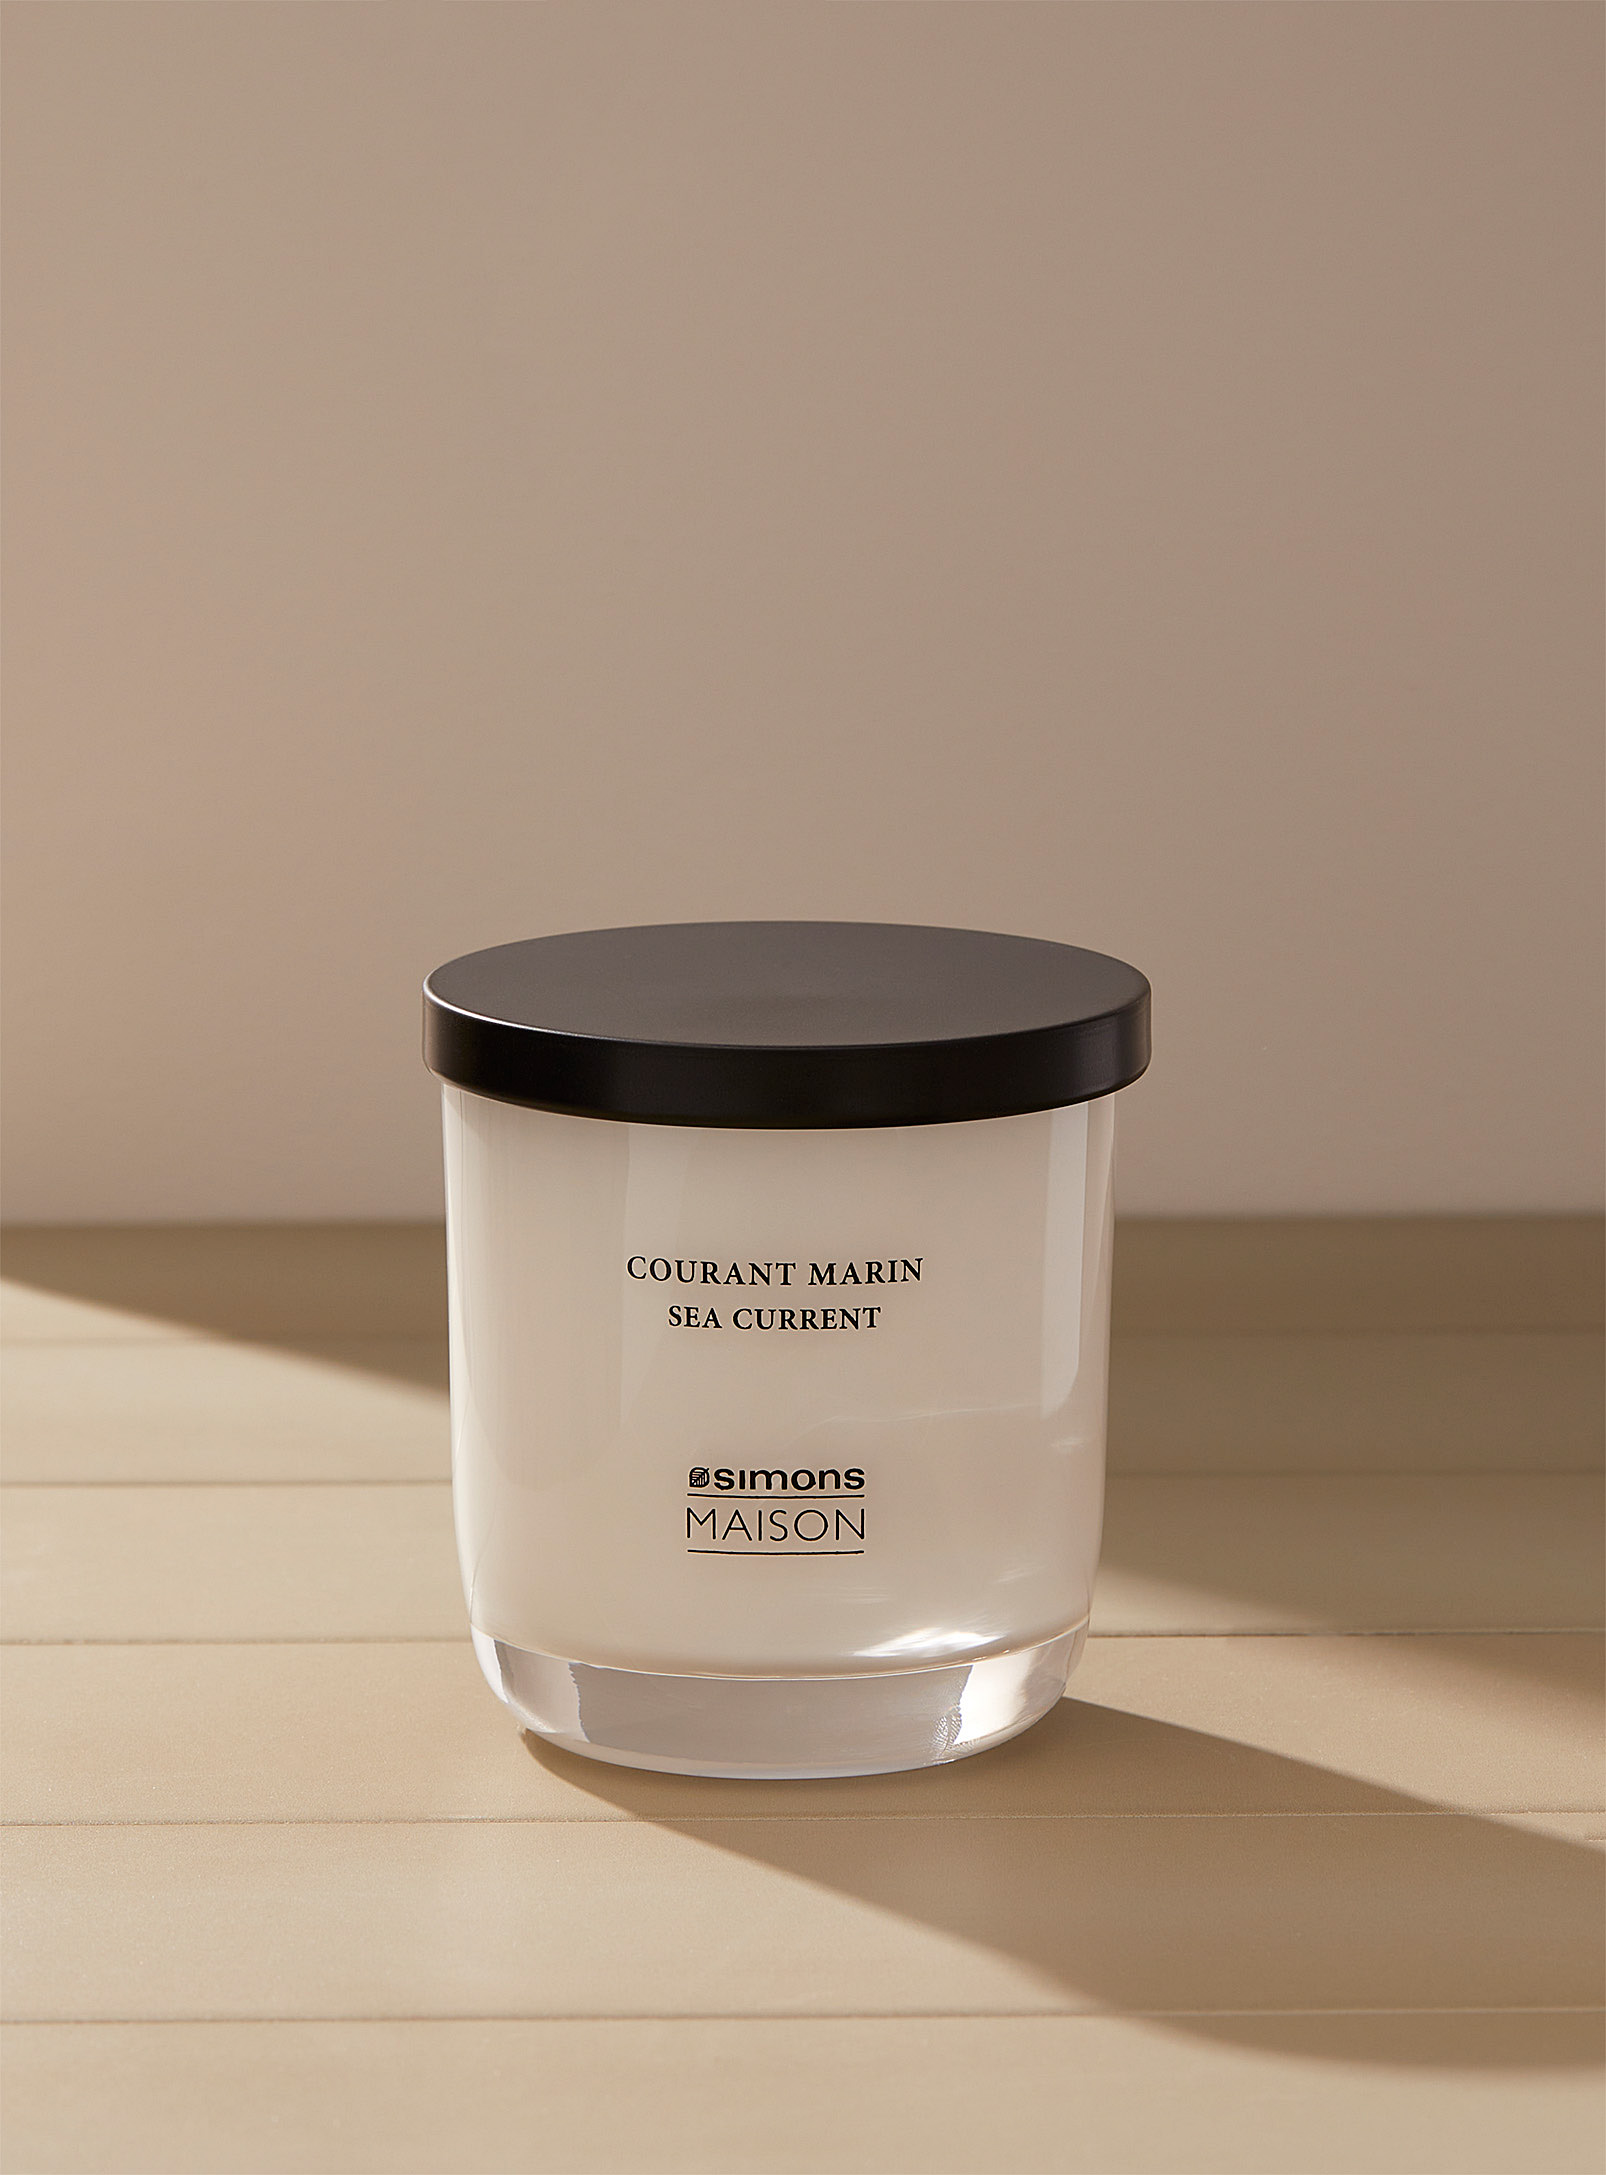 Simons Maison - Sea Current scented candle